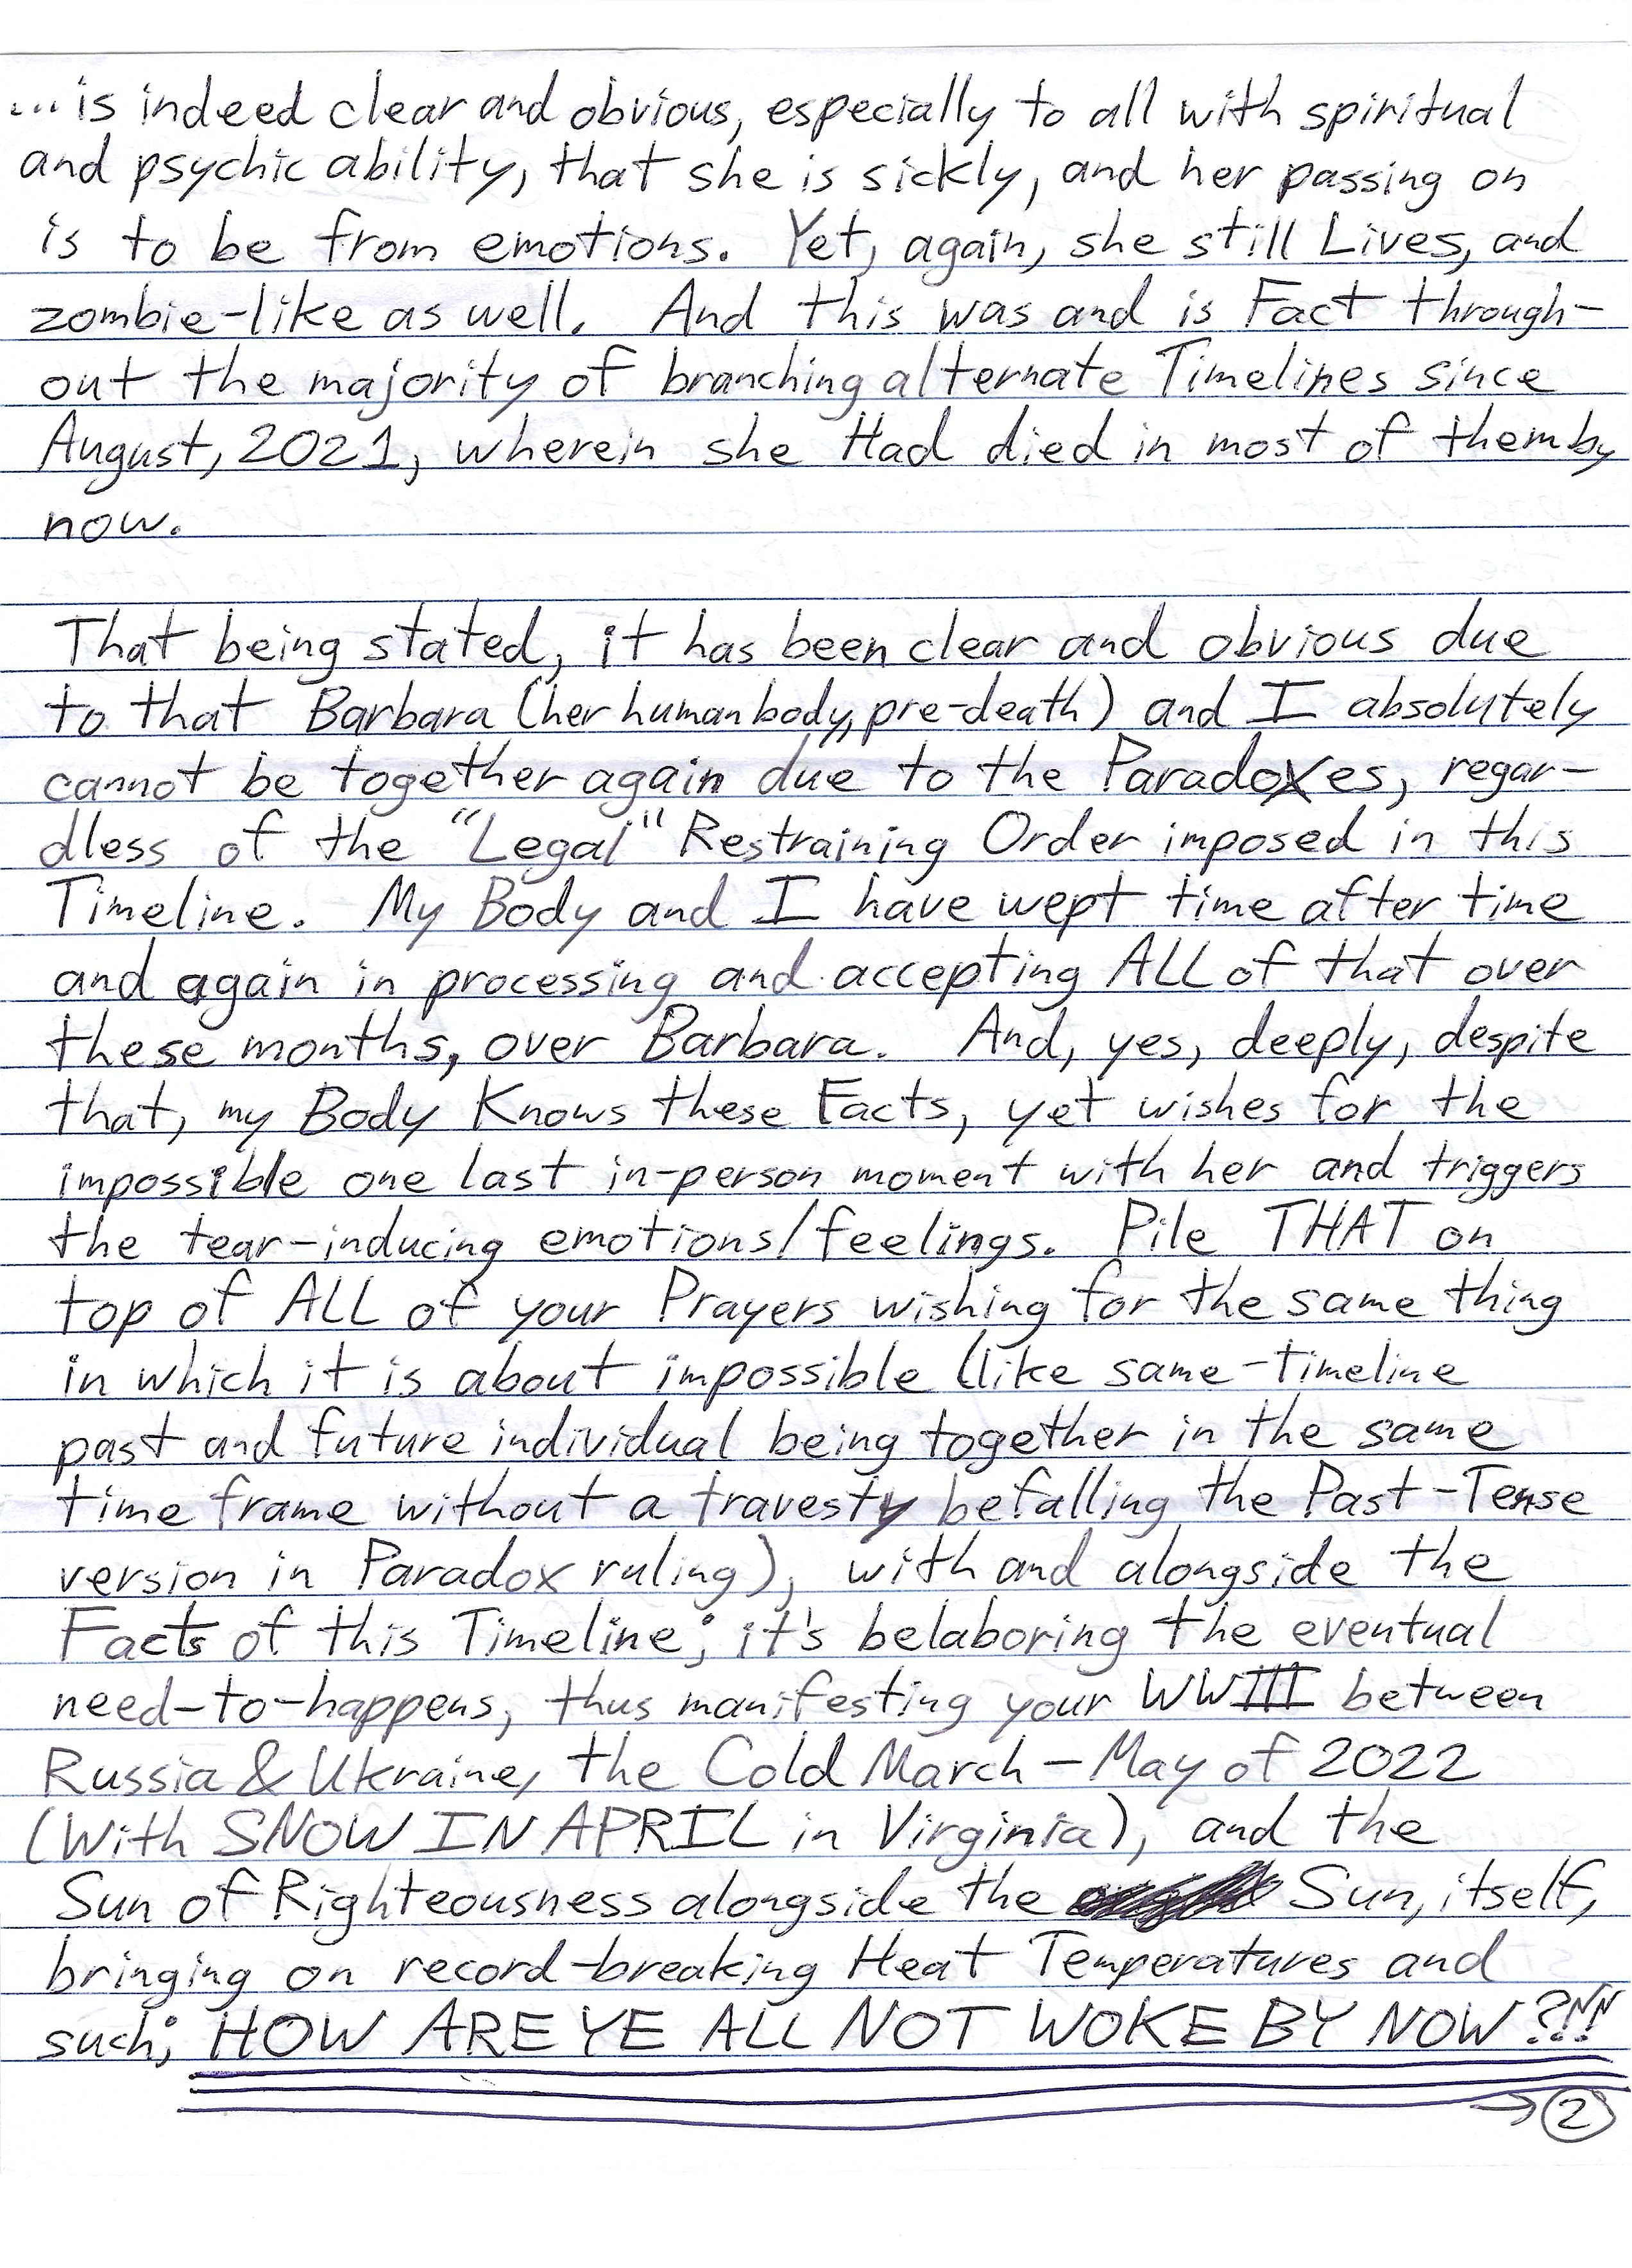 July 25th Letter Page 2.jpg